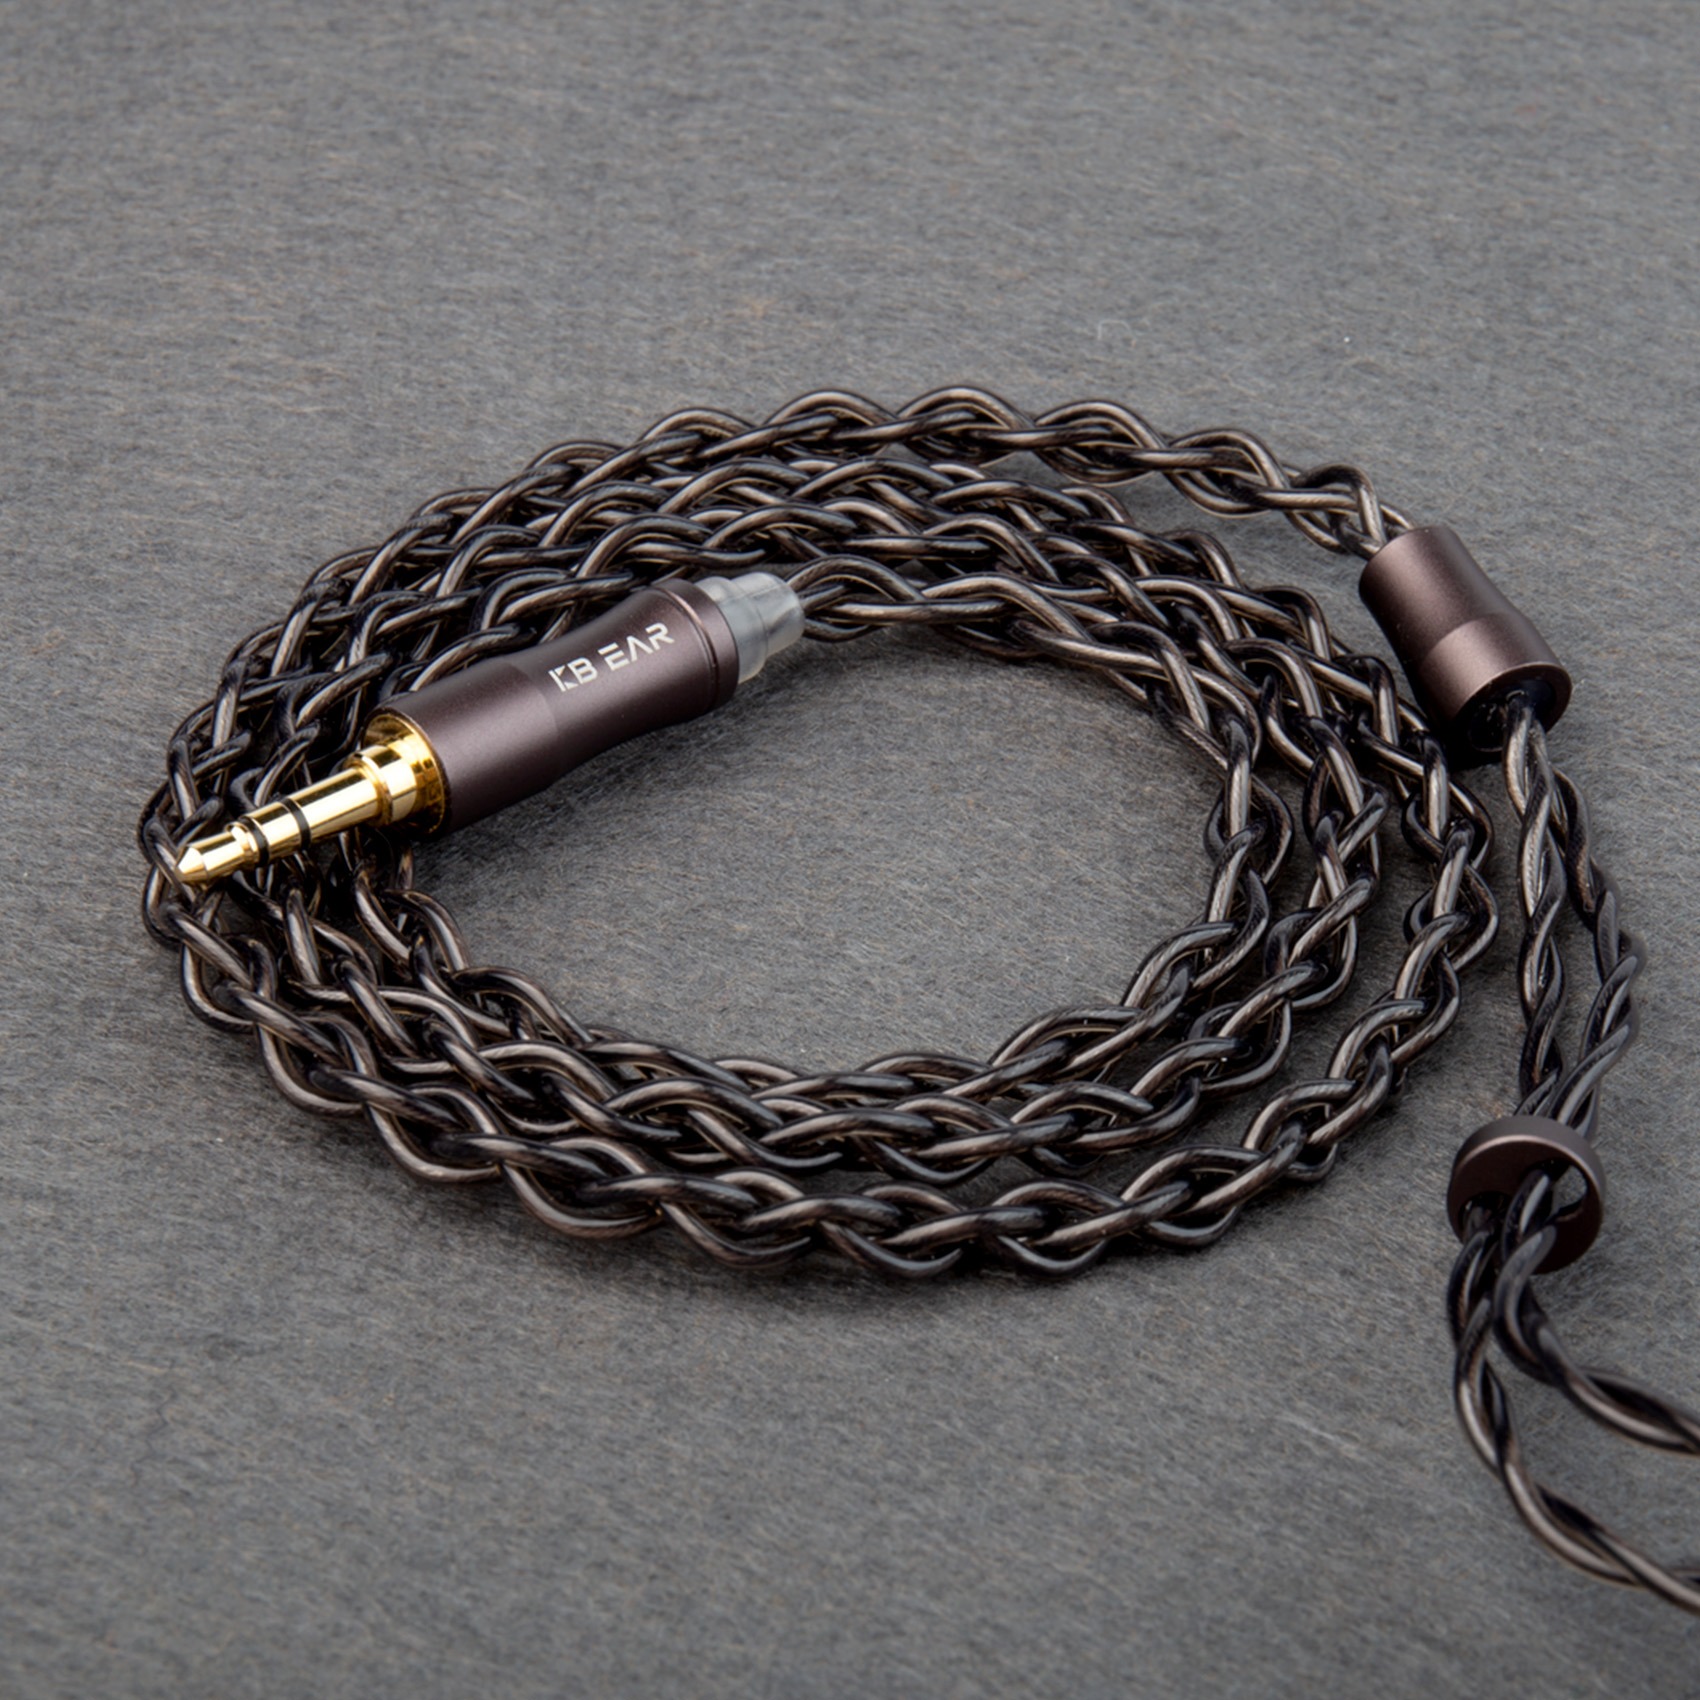 KBEAR Hazy 6N Graphene+Copper-Silver Alloy mixedly braided upgrade cable